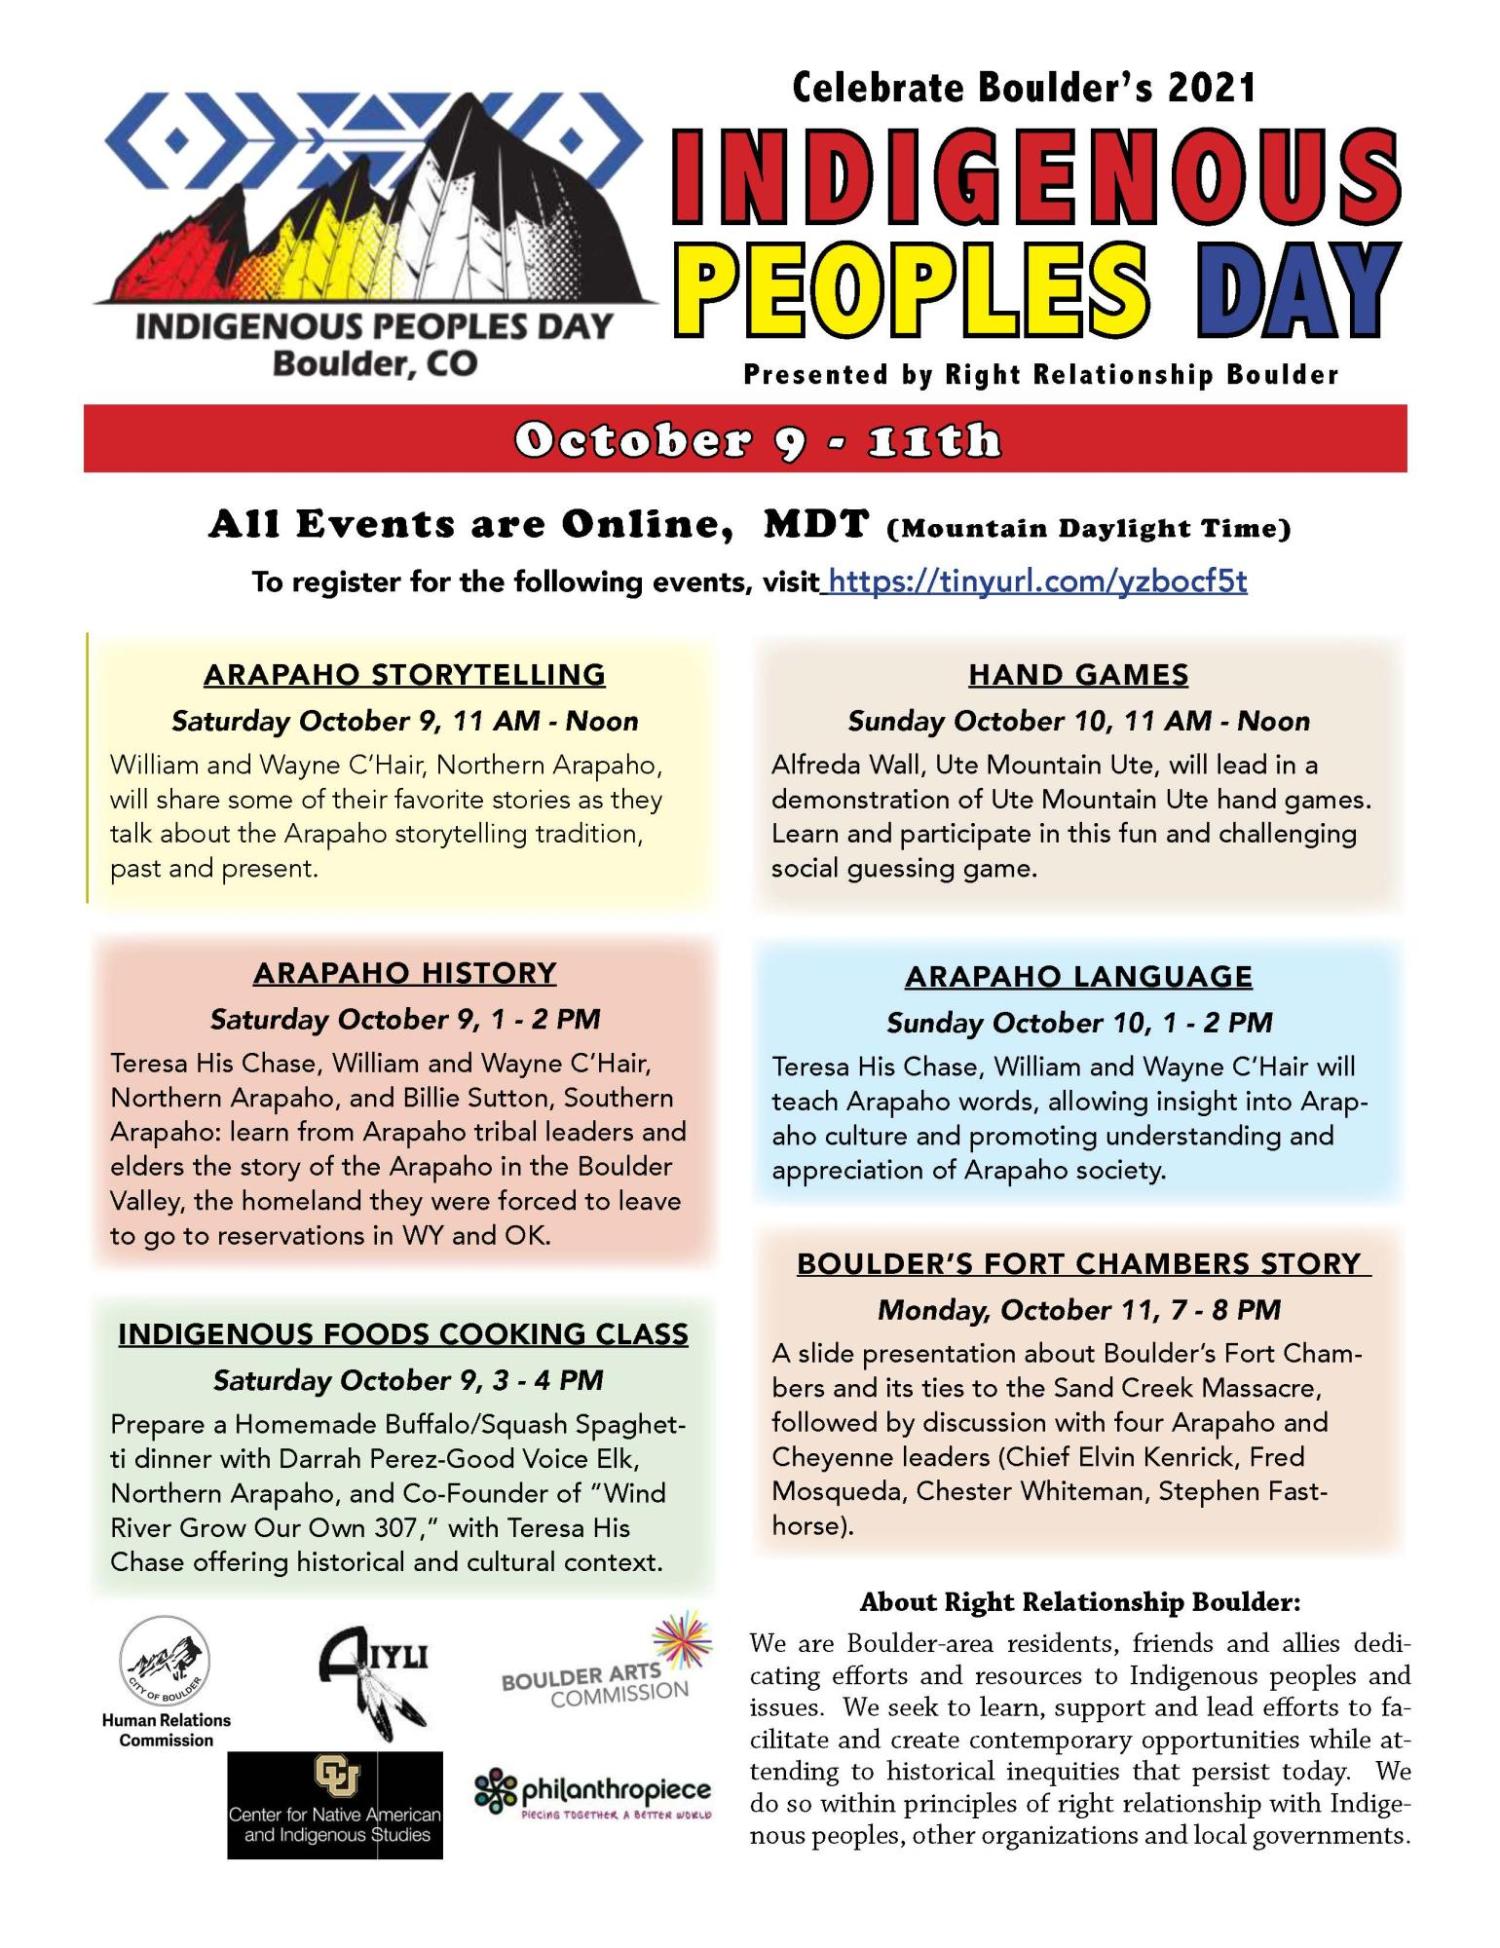 Indigenous Peoples Day Events Center for Native American and